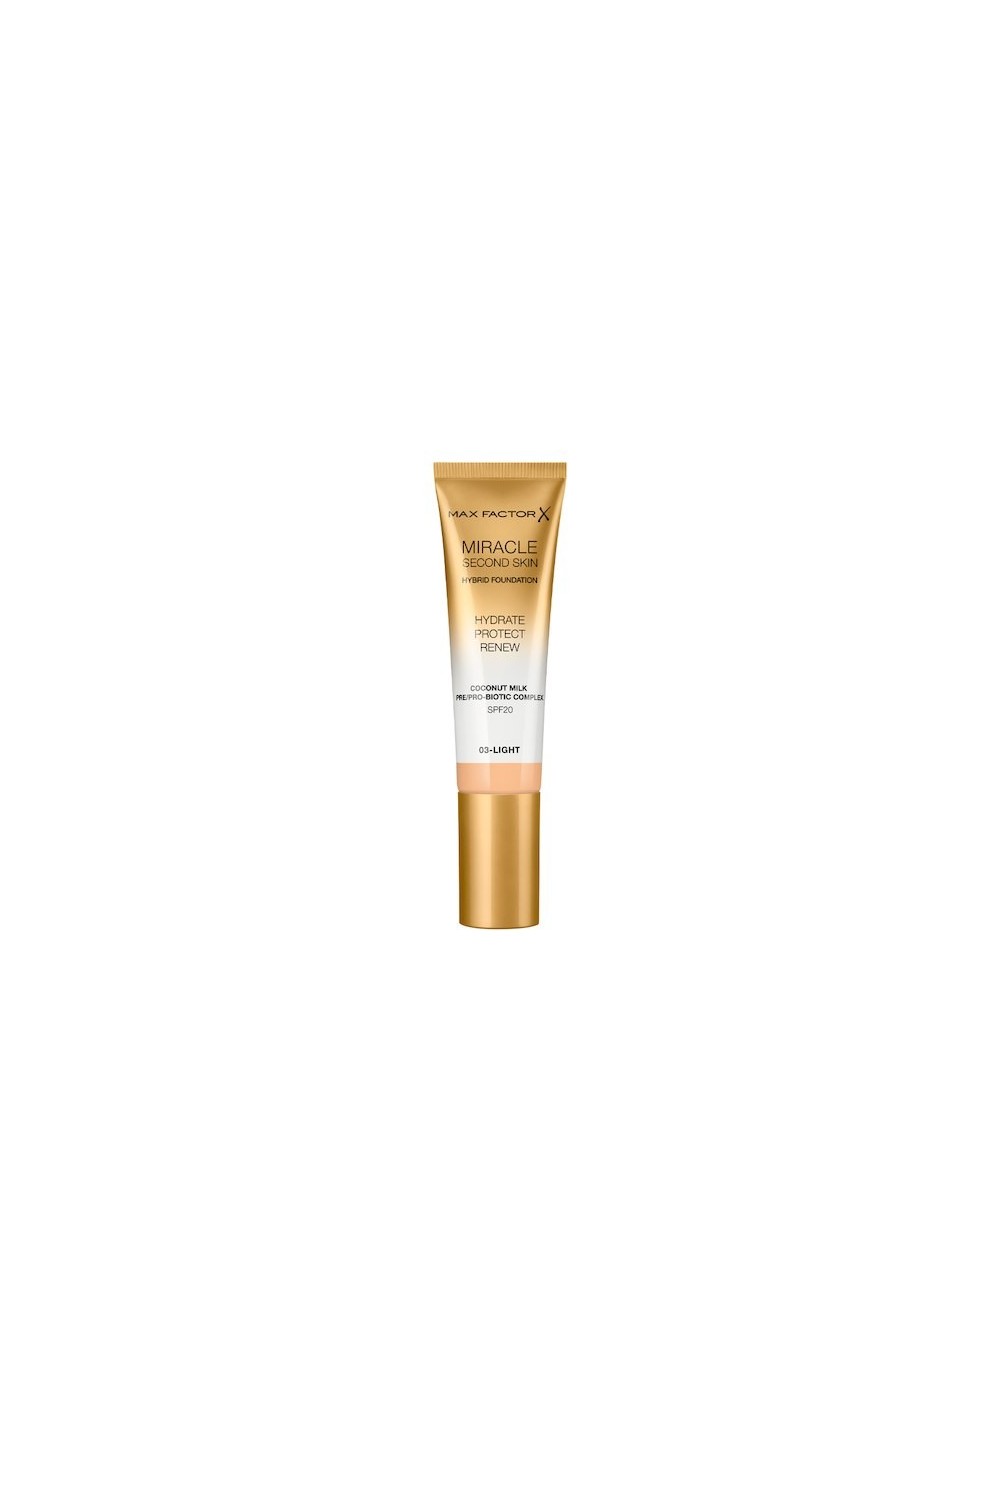 Max Factor Miracle Second Skin Spf20 3 Light 30 ml